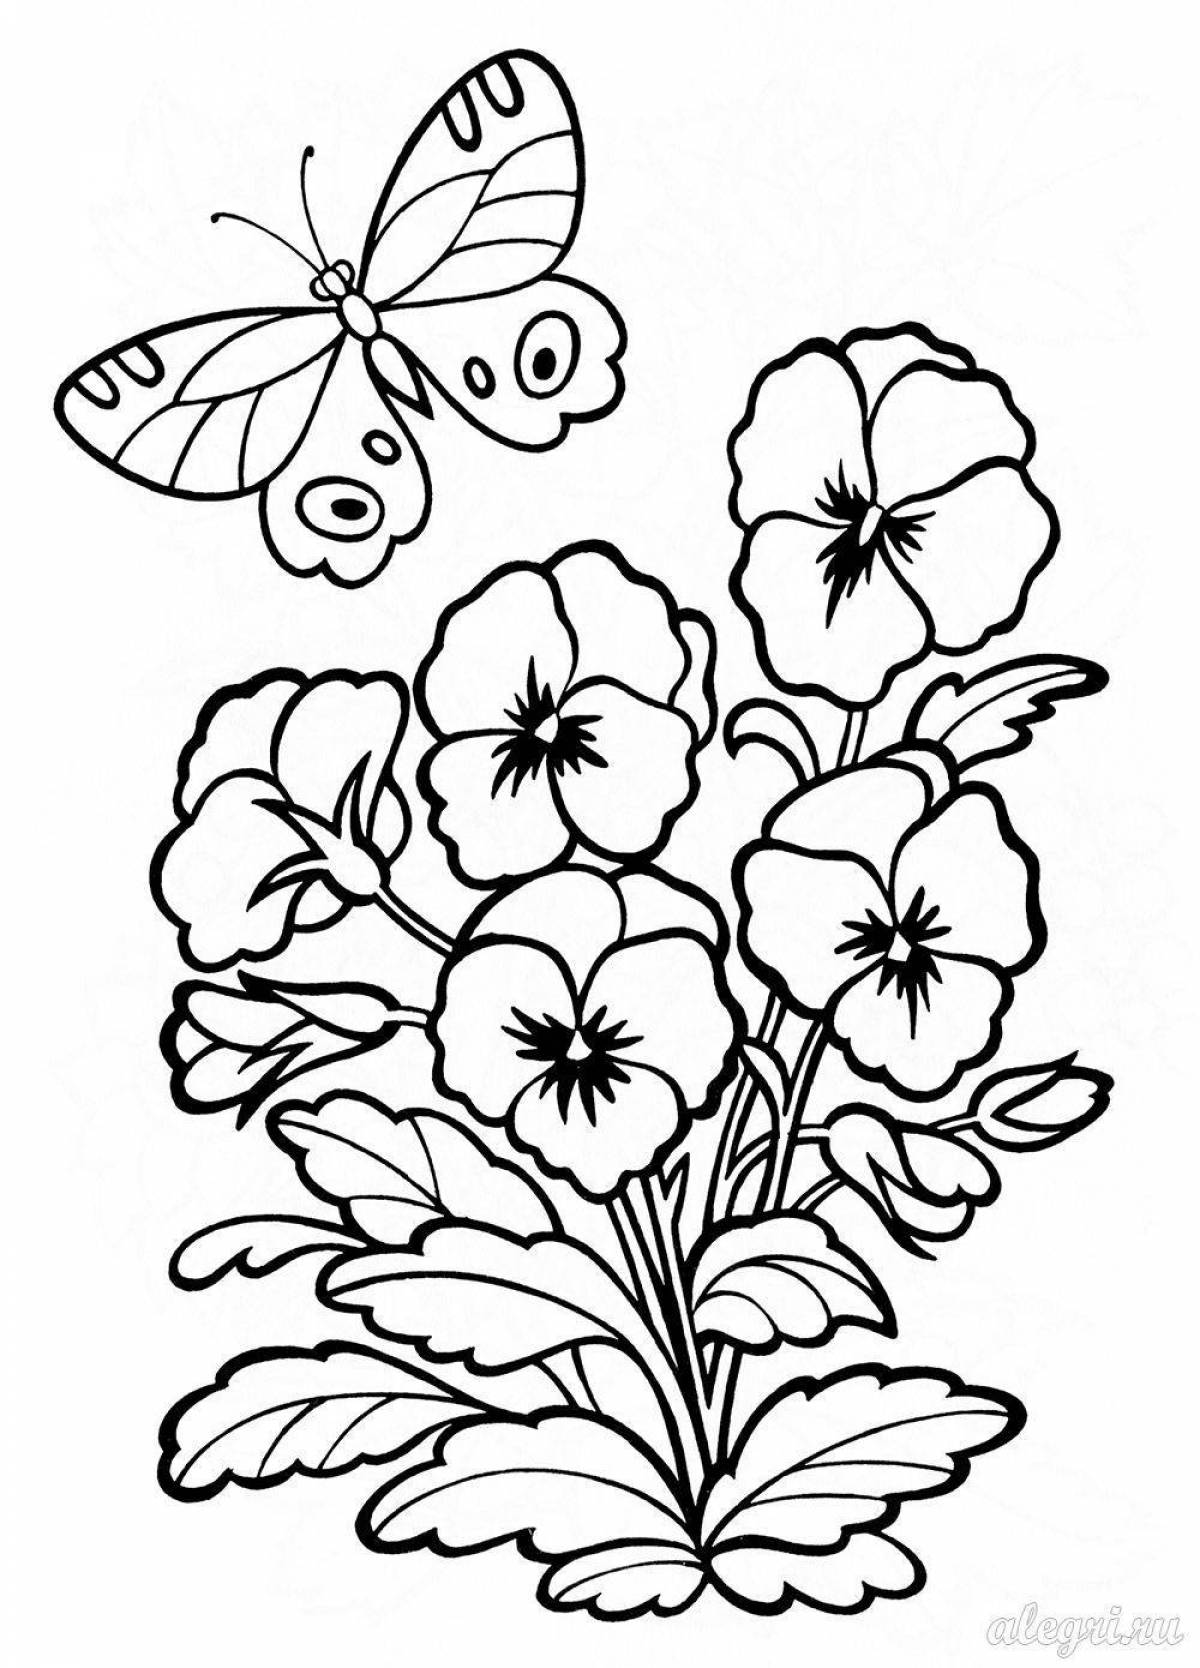 Inspiring flower coloring pages for kids